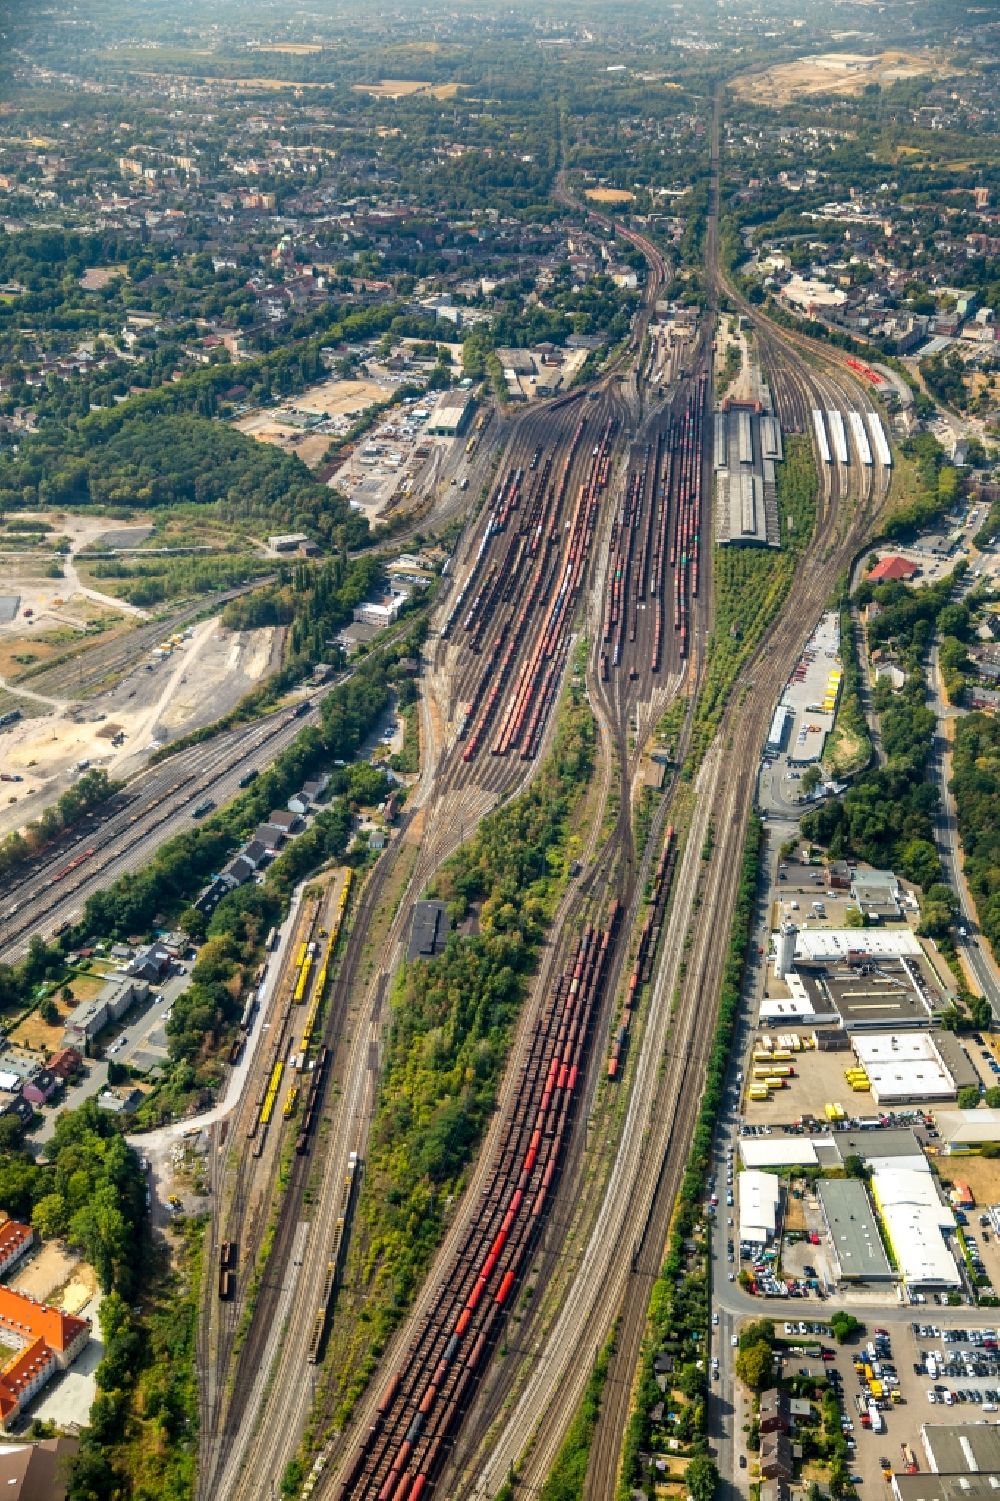 Herne from the bird's eye view: Railway tracks in the East of the main station of Wanne-Eickel in Herne in the state of North Rhine-Westphalia